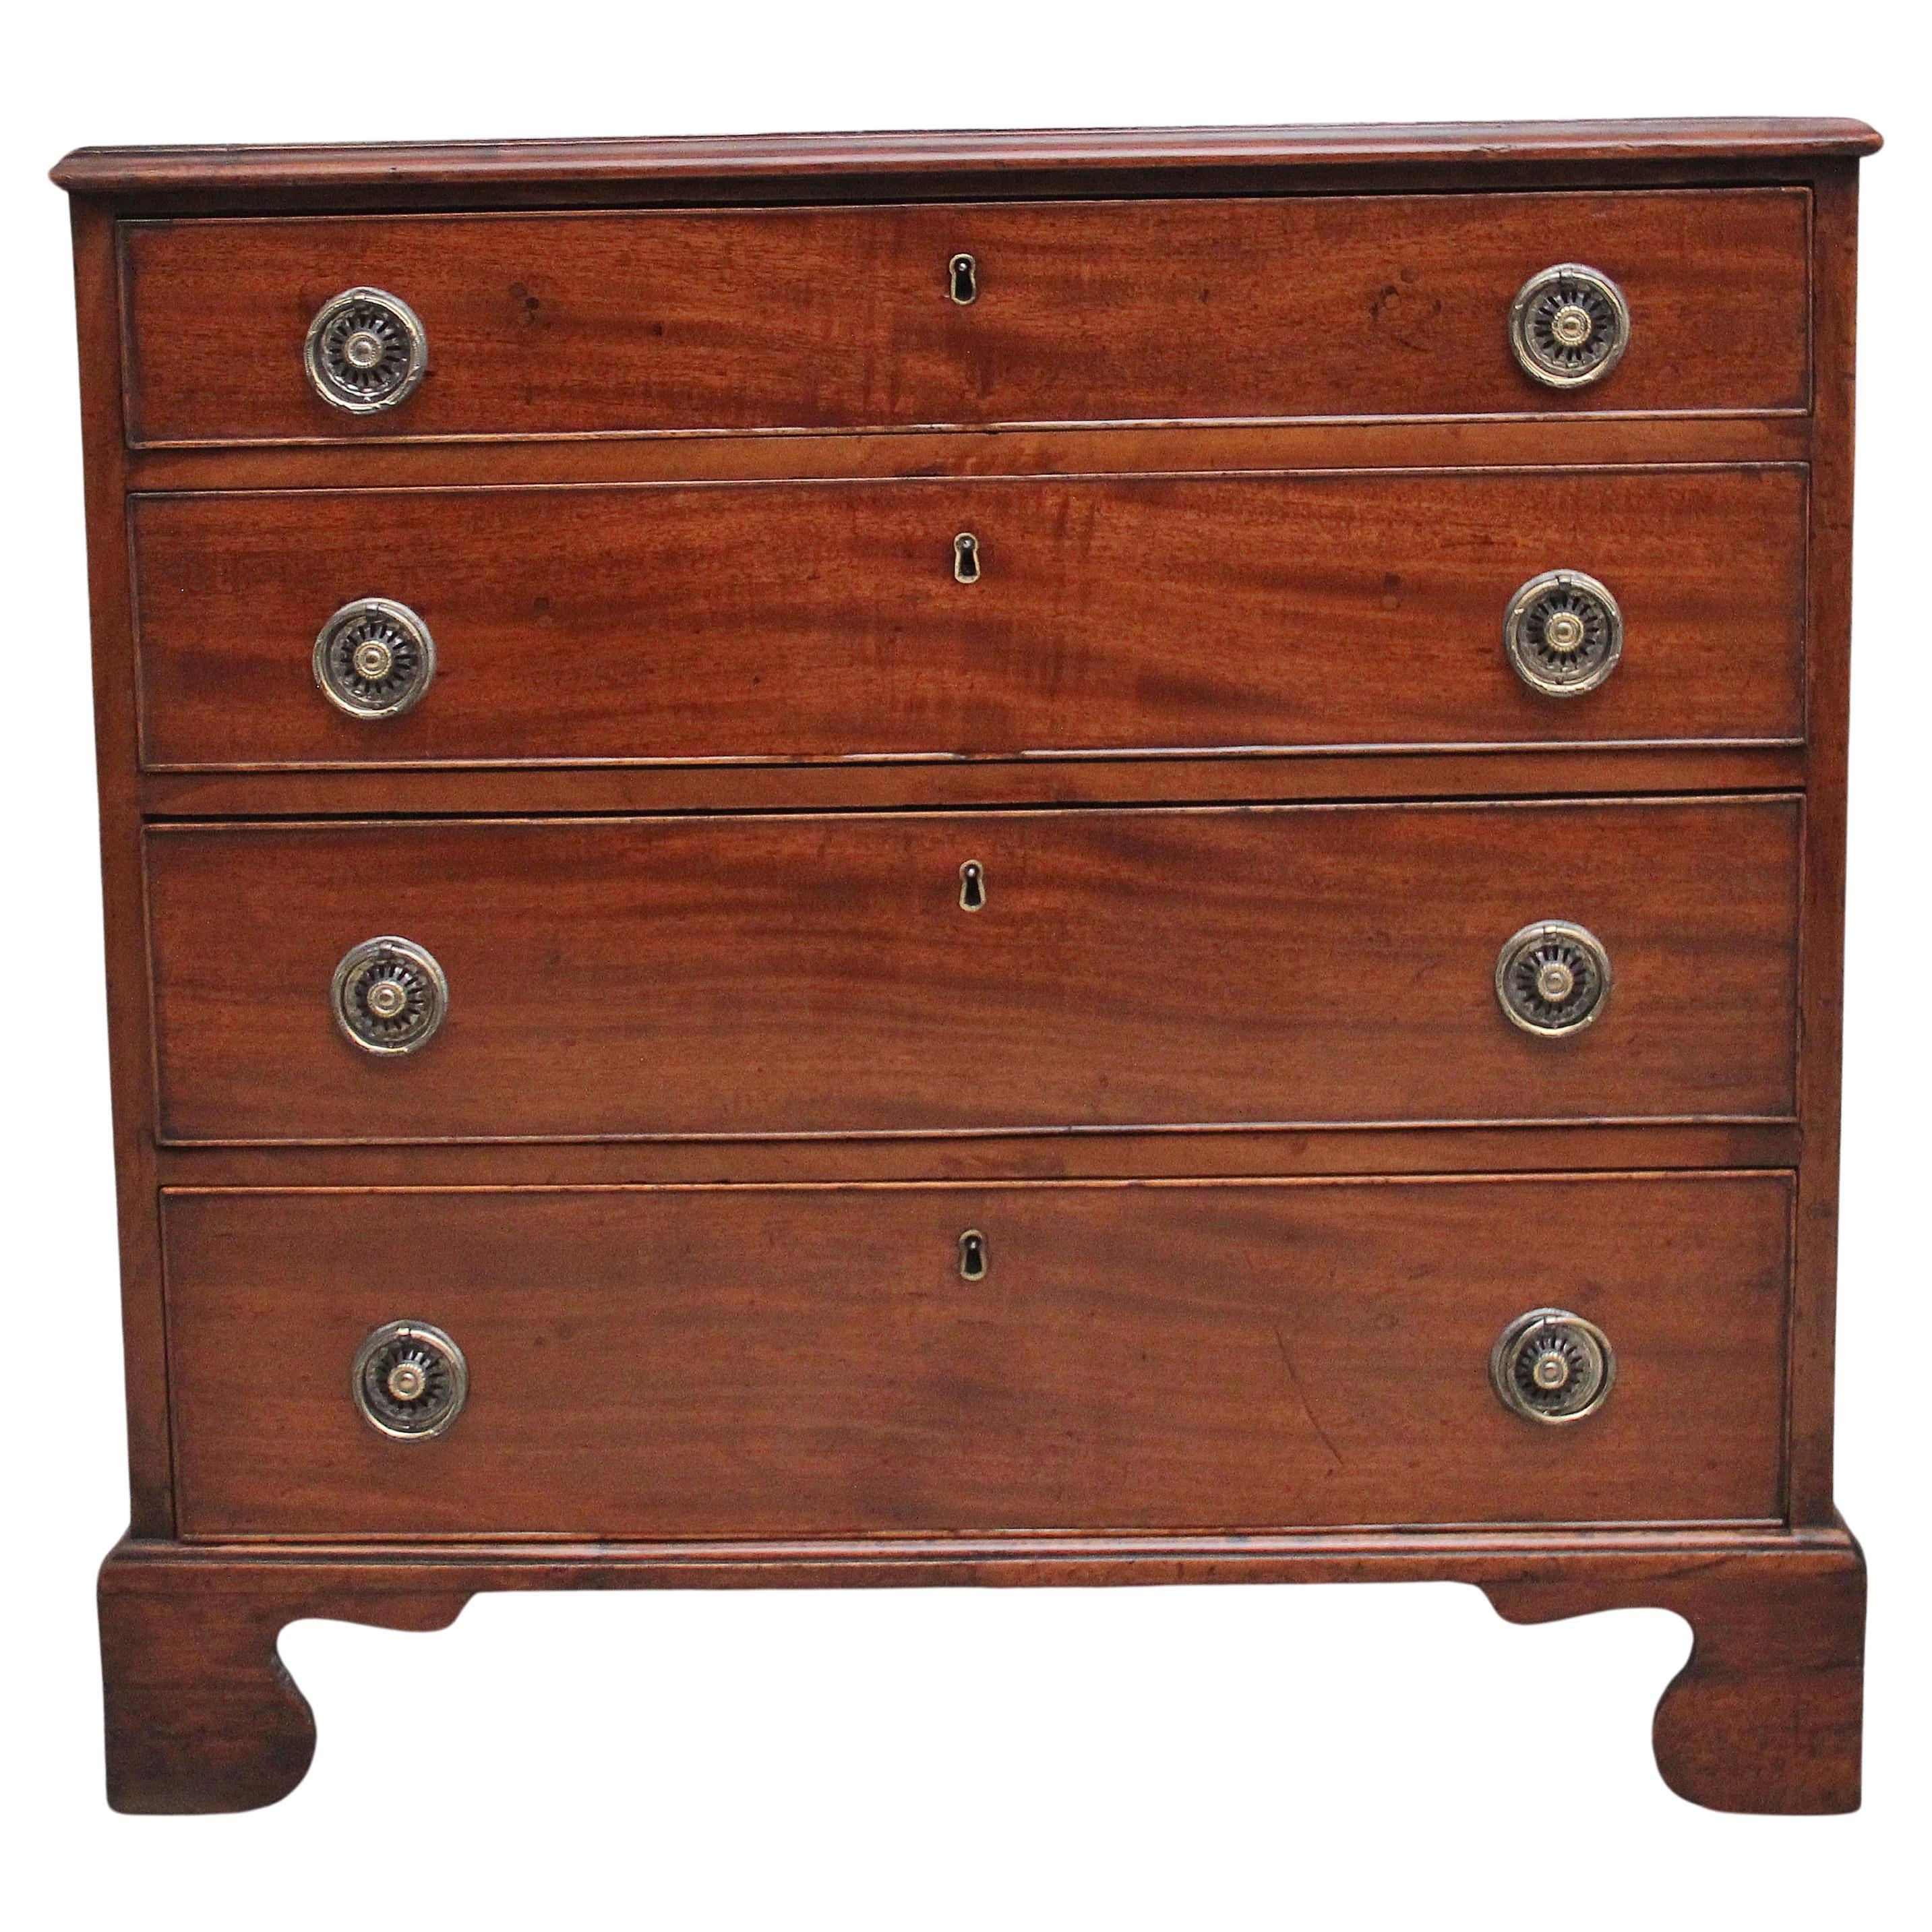 Early 19th Century mahogany chest For Sale